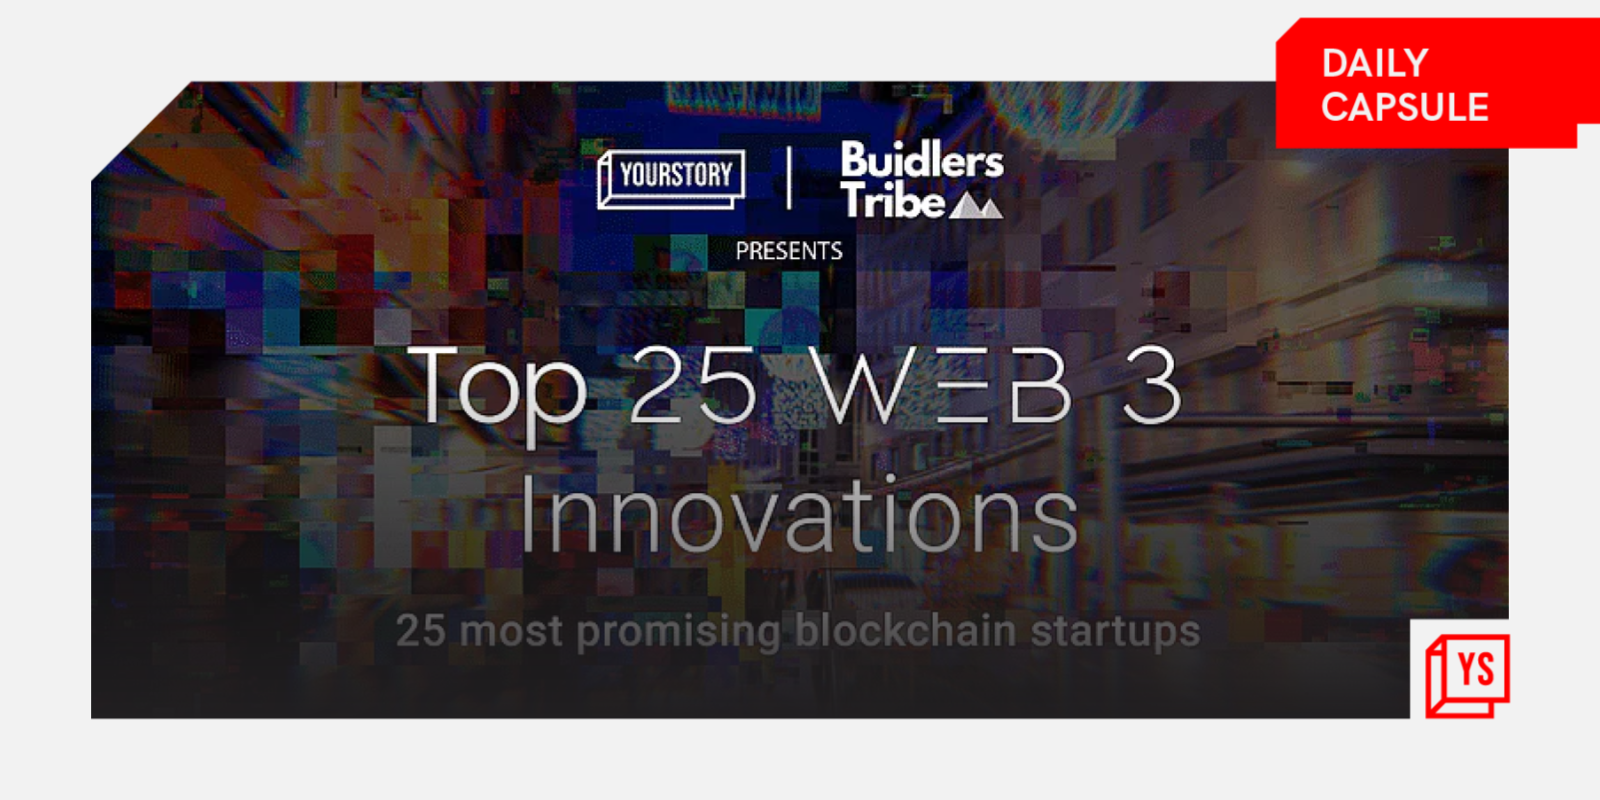 YourStory & Buidlers Tribe list top Web3 innovations